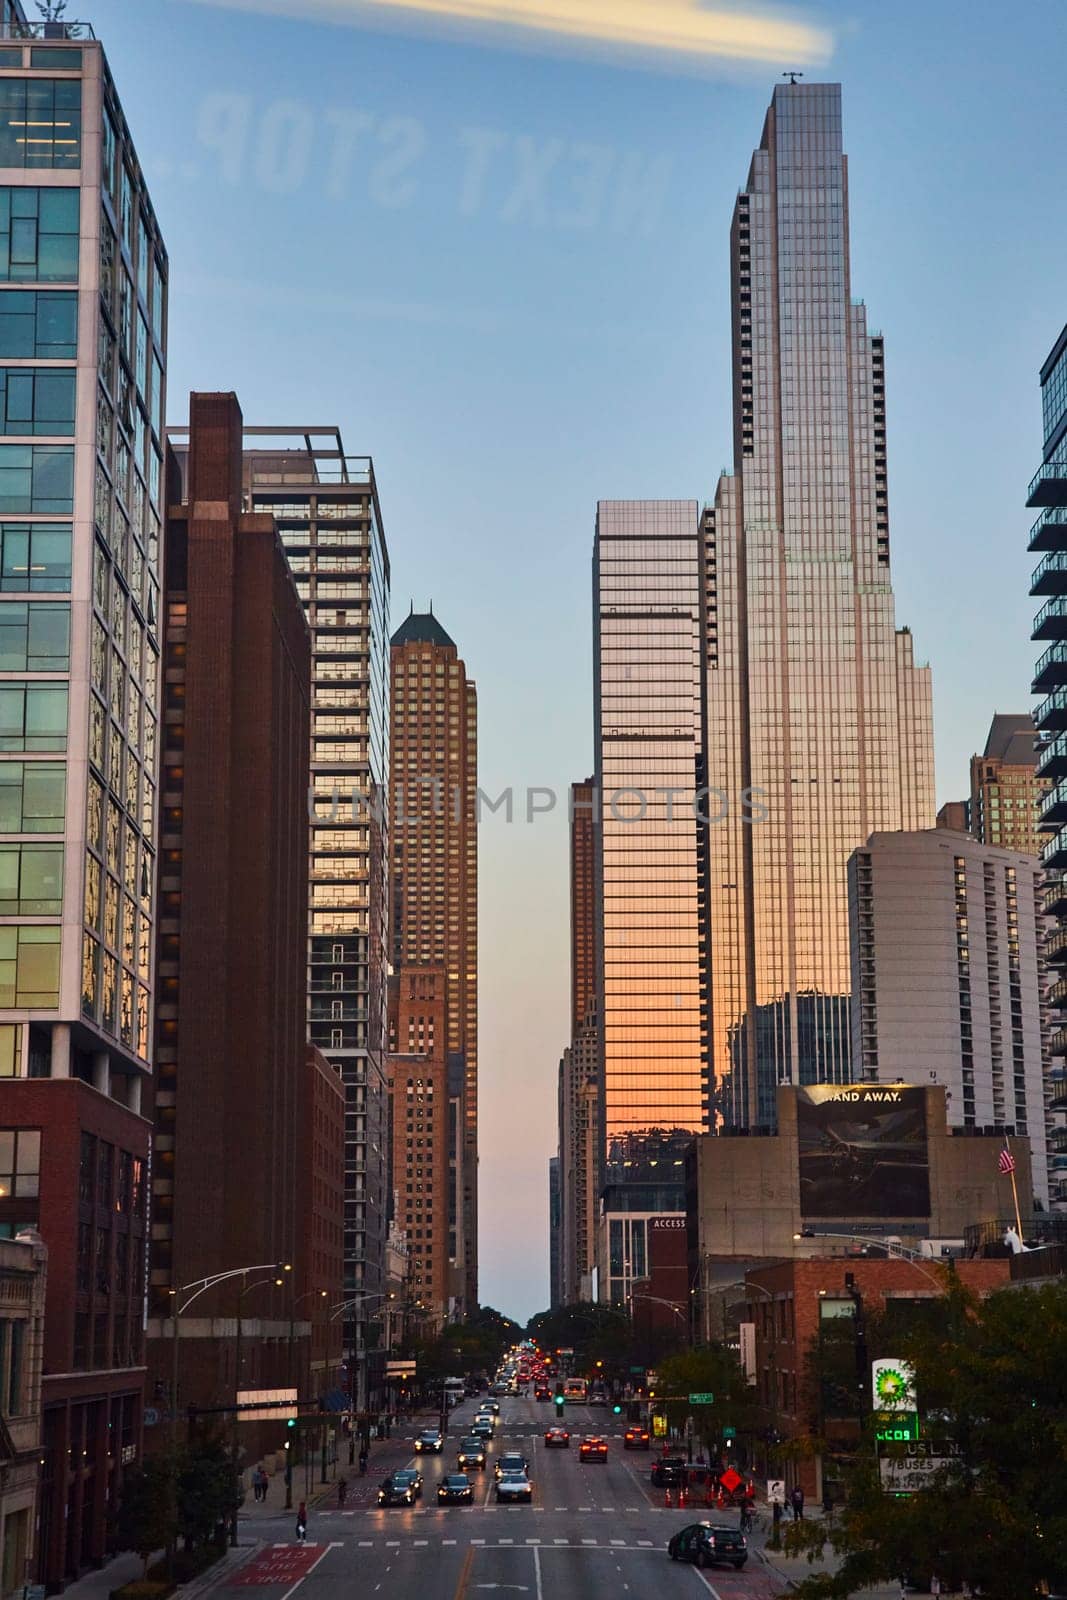 Chicago inner city sunset lighting on skyscraper with blue sky and city traffic, Illinois by njproductions